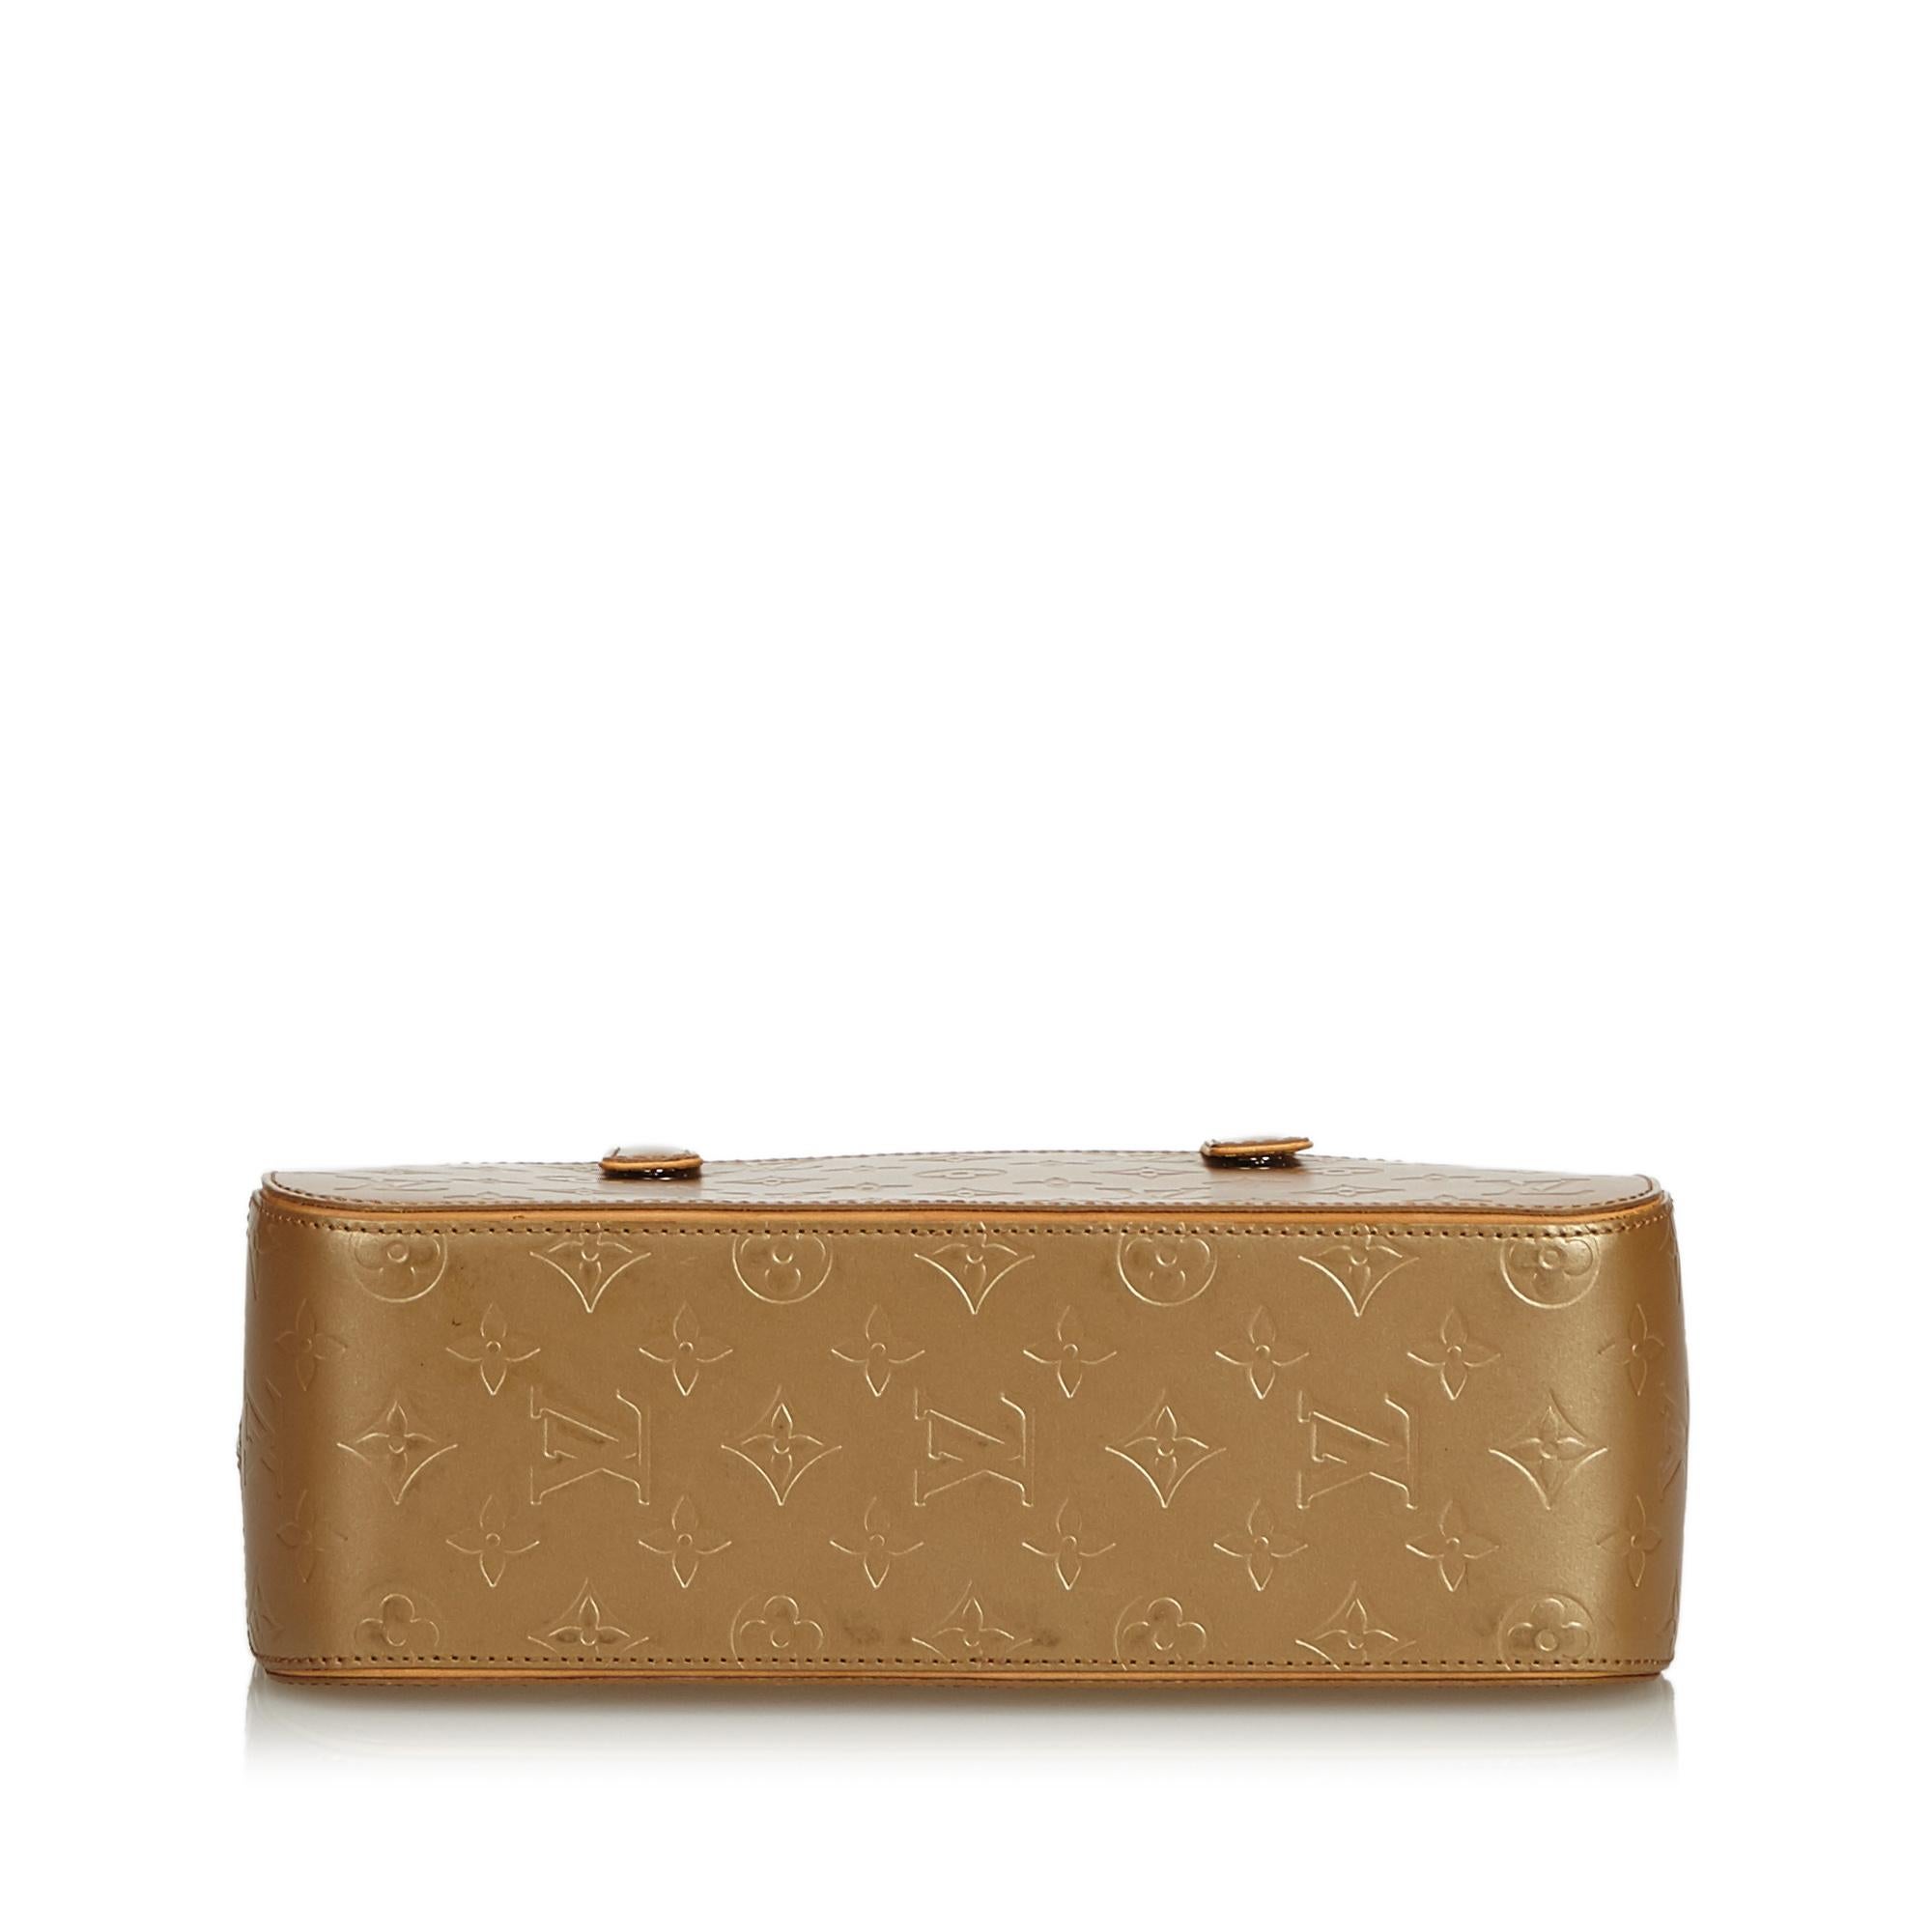 Vintage Authentic Louis Vuitton Gold Monogram Glace Shelton France MEDIUM  In Good Condition For Sale In Orlando, FL